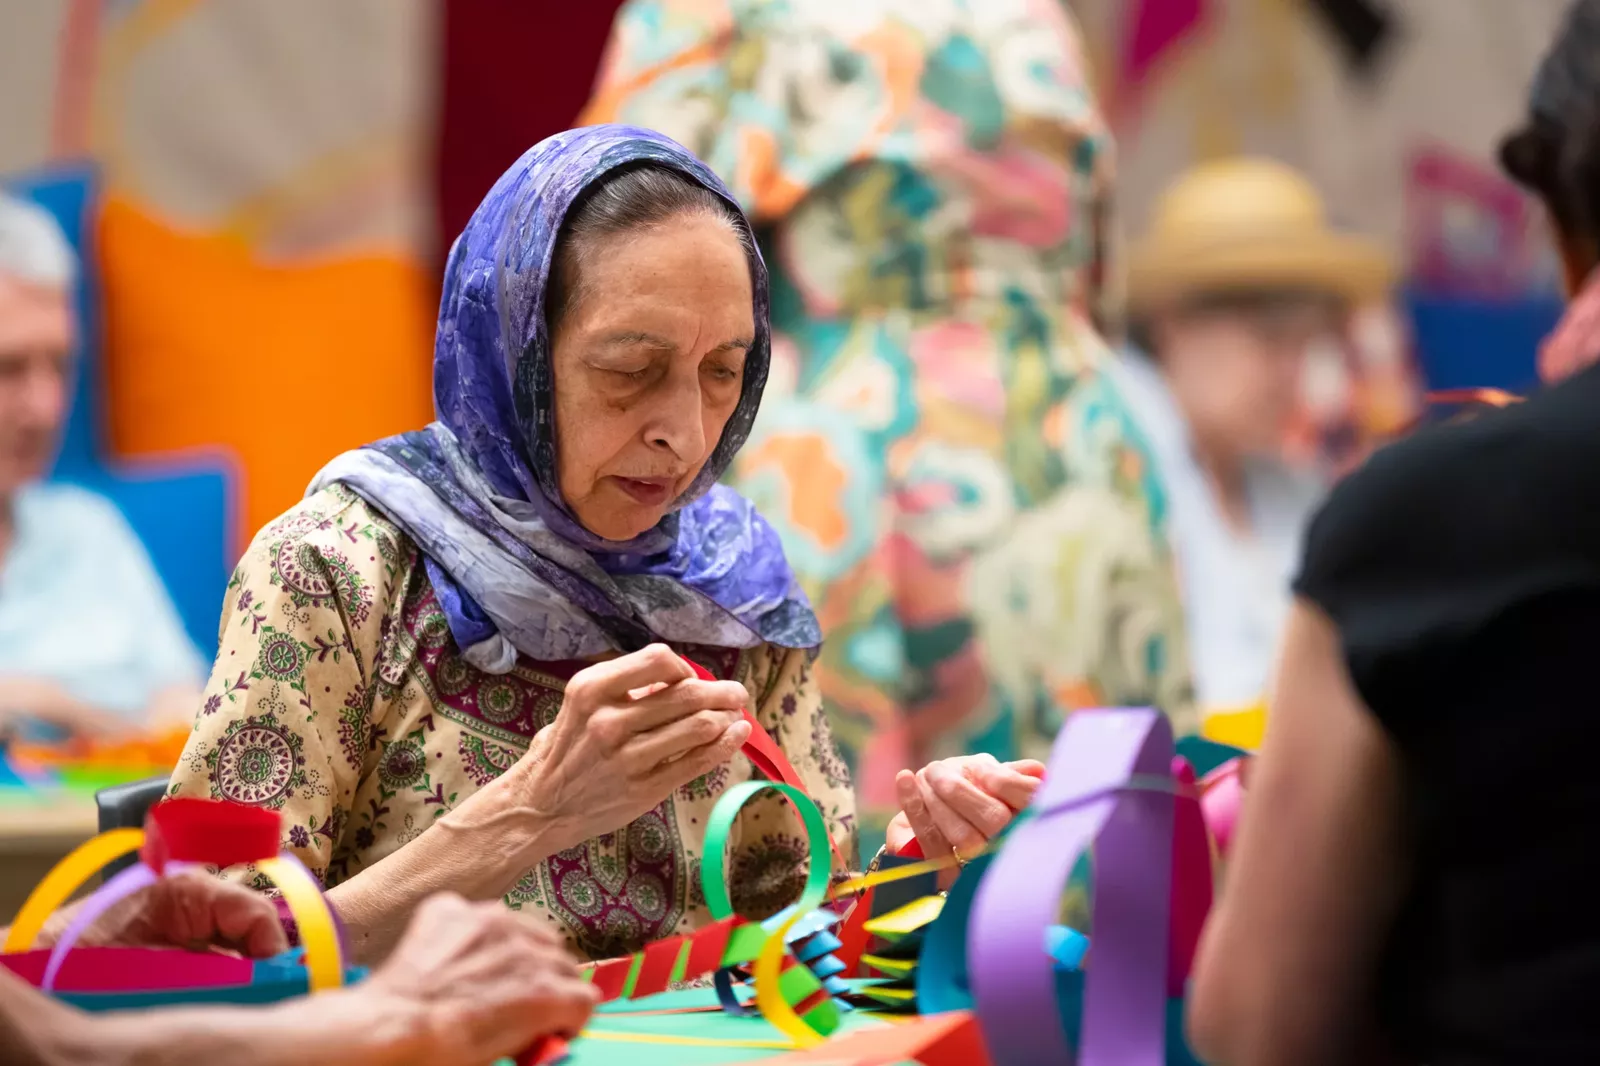 A woman wearing a head scarf is focussed on an artmaking task, assembling colourful strips of paper.